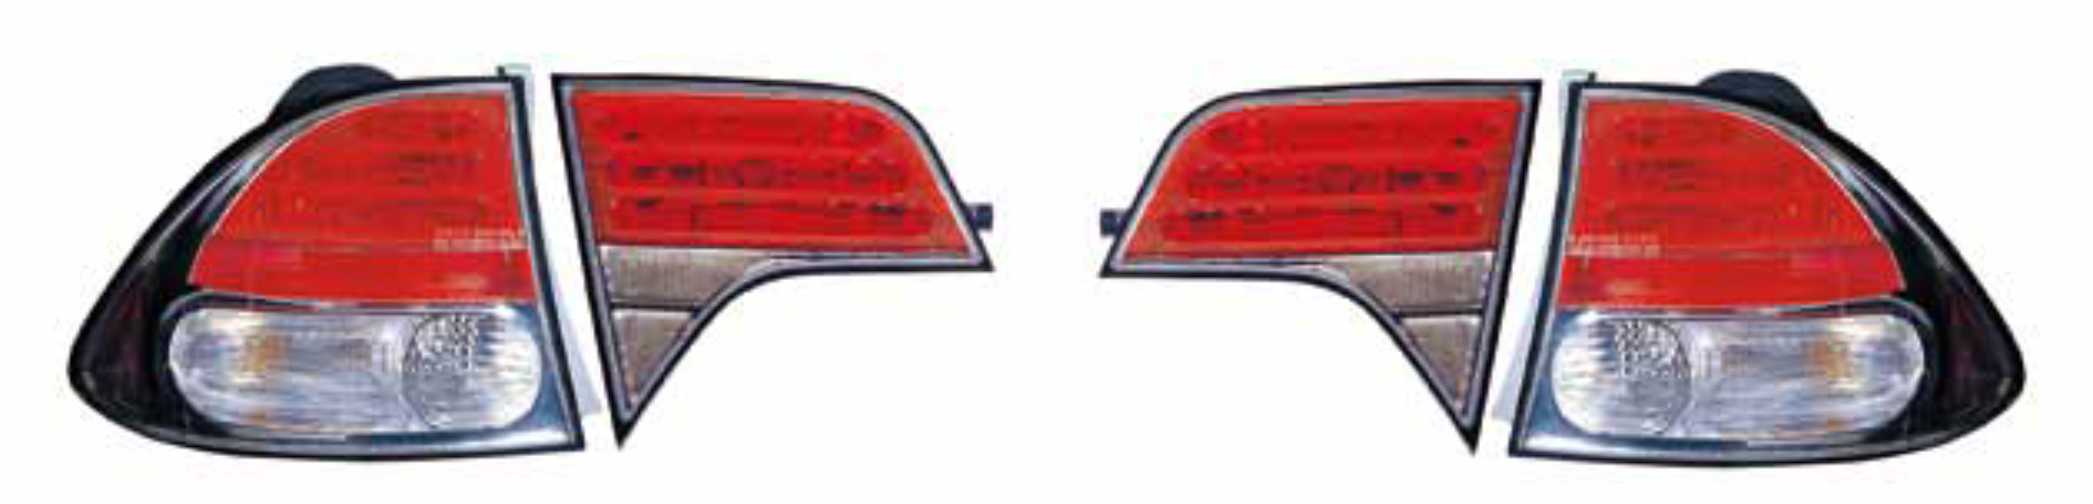 TAL500876 - 2004360 - CIVIC FD 06-07 TAIL LAMP AFTER MARKET